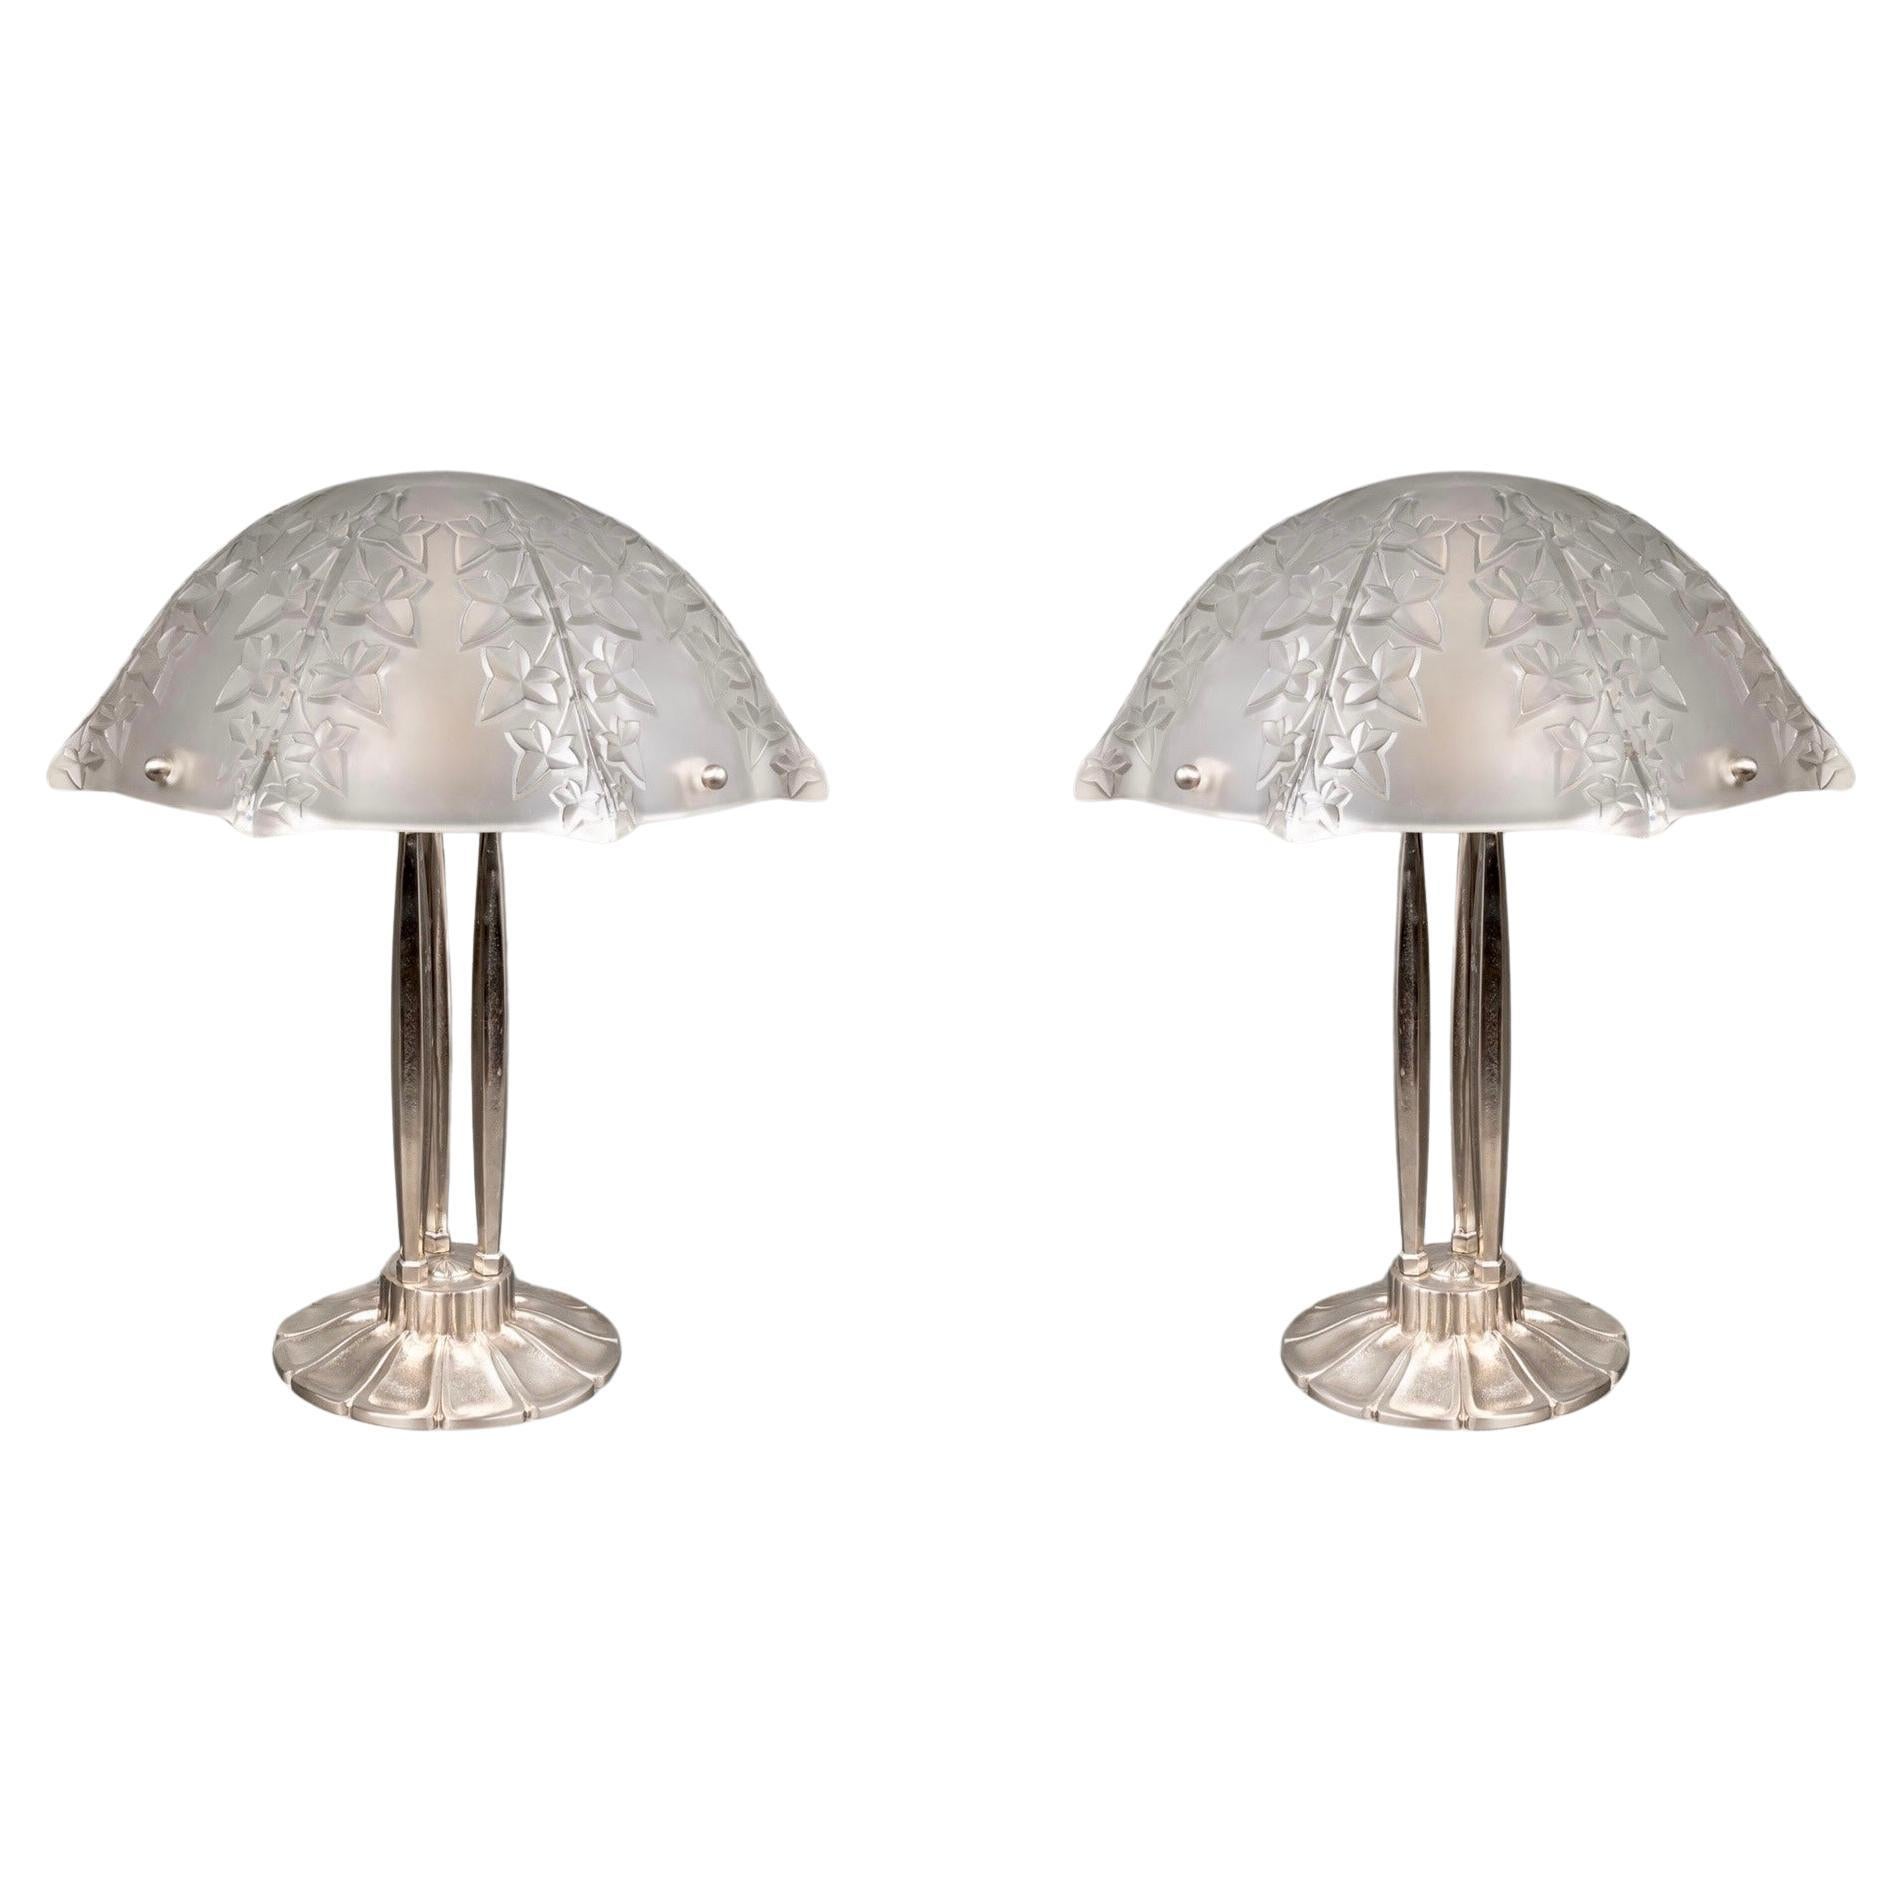 1927 René Lalique - Pair Of Lamps Lierre Ivy Glass & Nickeled Bronze  For Sale